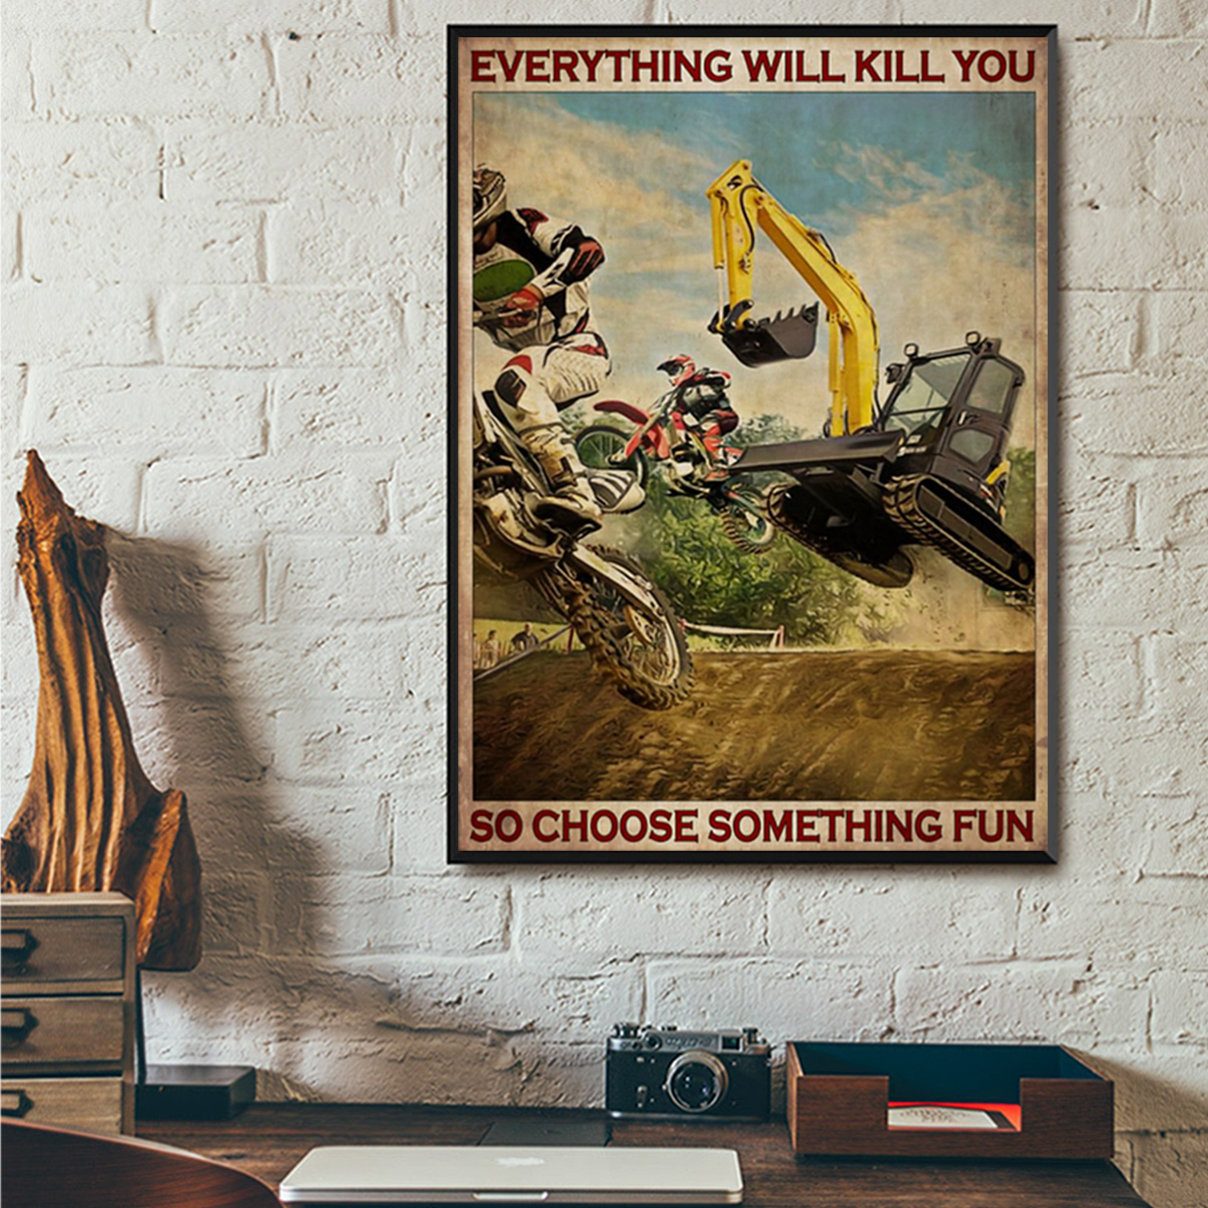 Motorcross and excavator everything will kill you so choose something fun poster A2